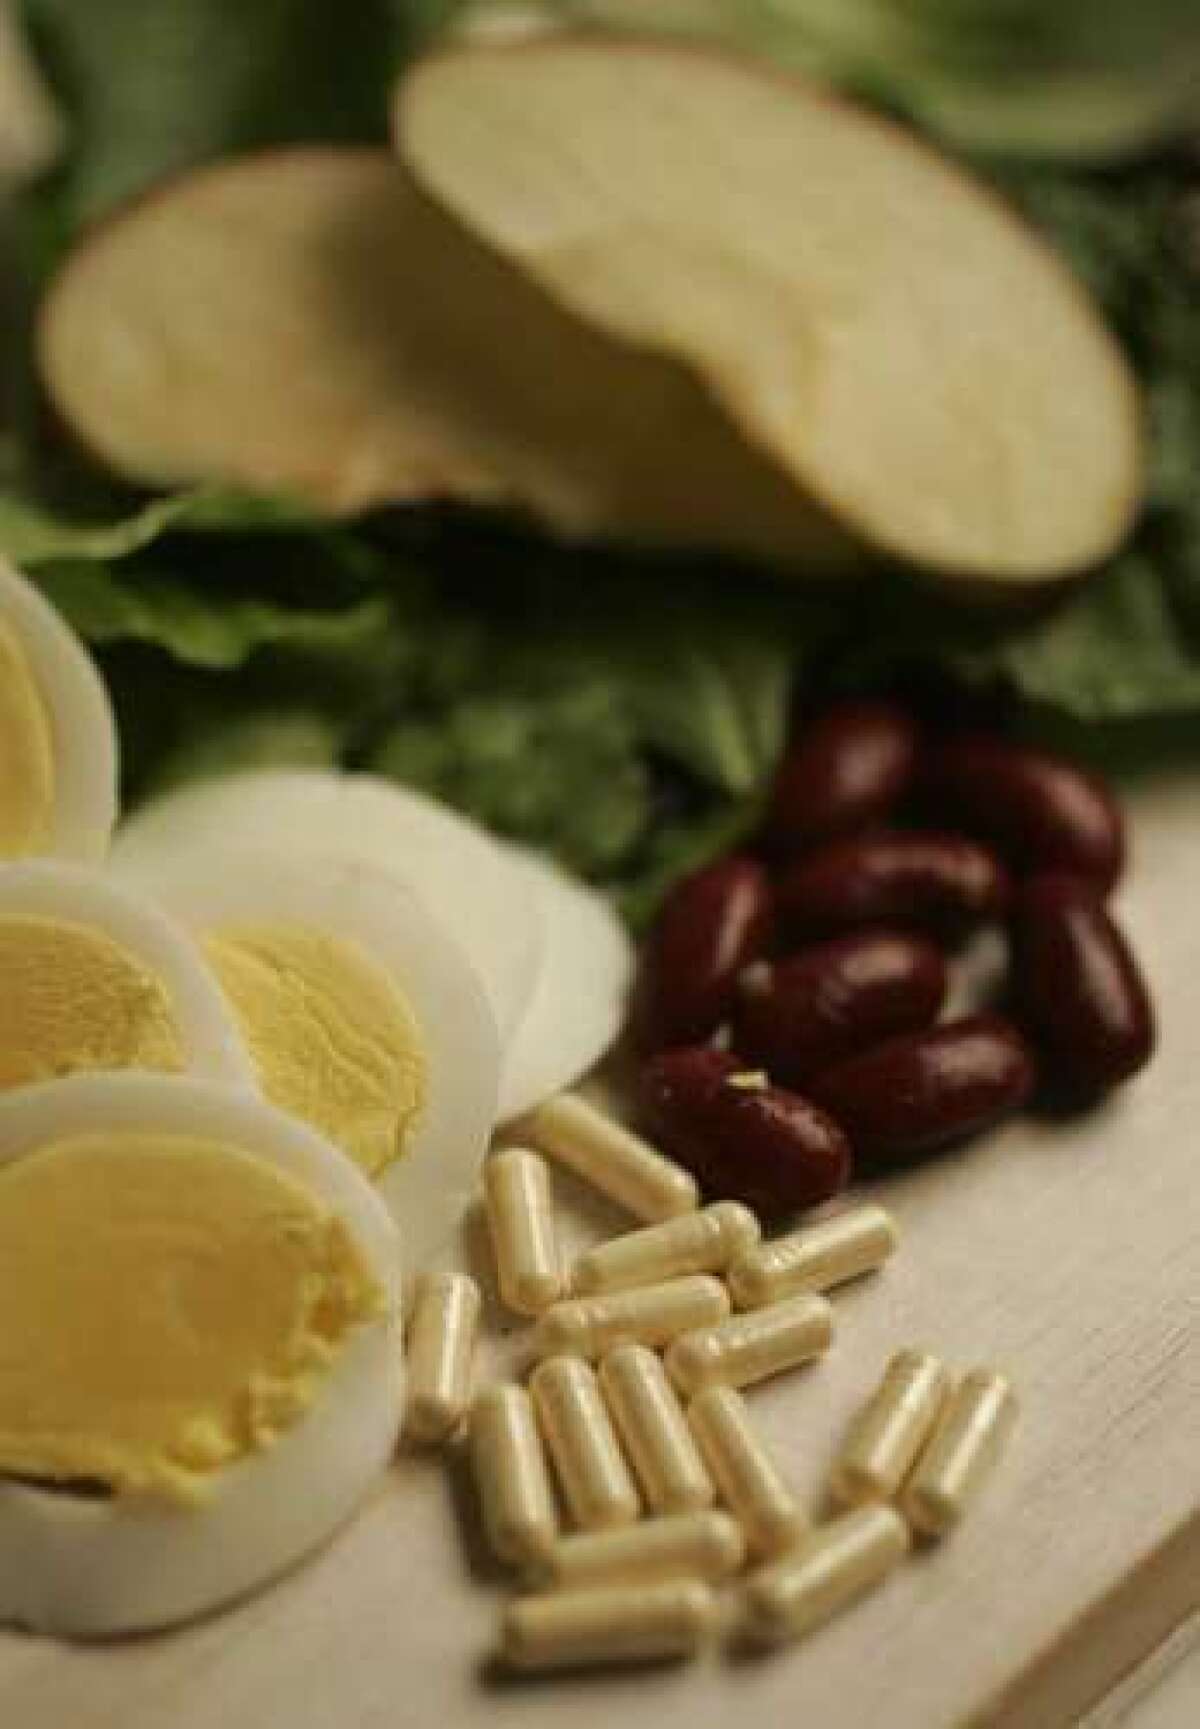 Women who took folic acid supplements were less likely to have children with an autism spectrum disorder, according to a new study in JAMA. Folic acid is also found in eggs, beans and certain fruits and vegetables.